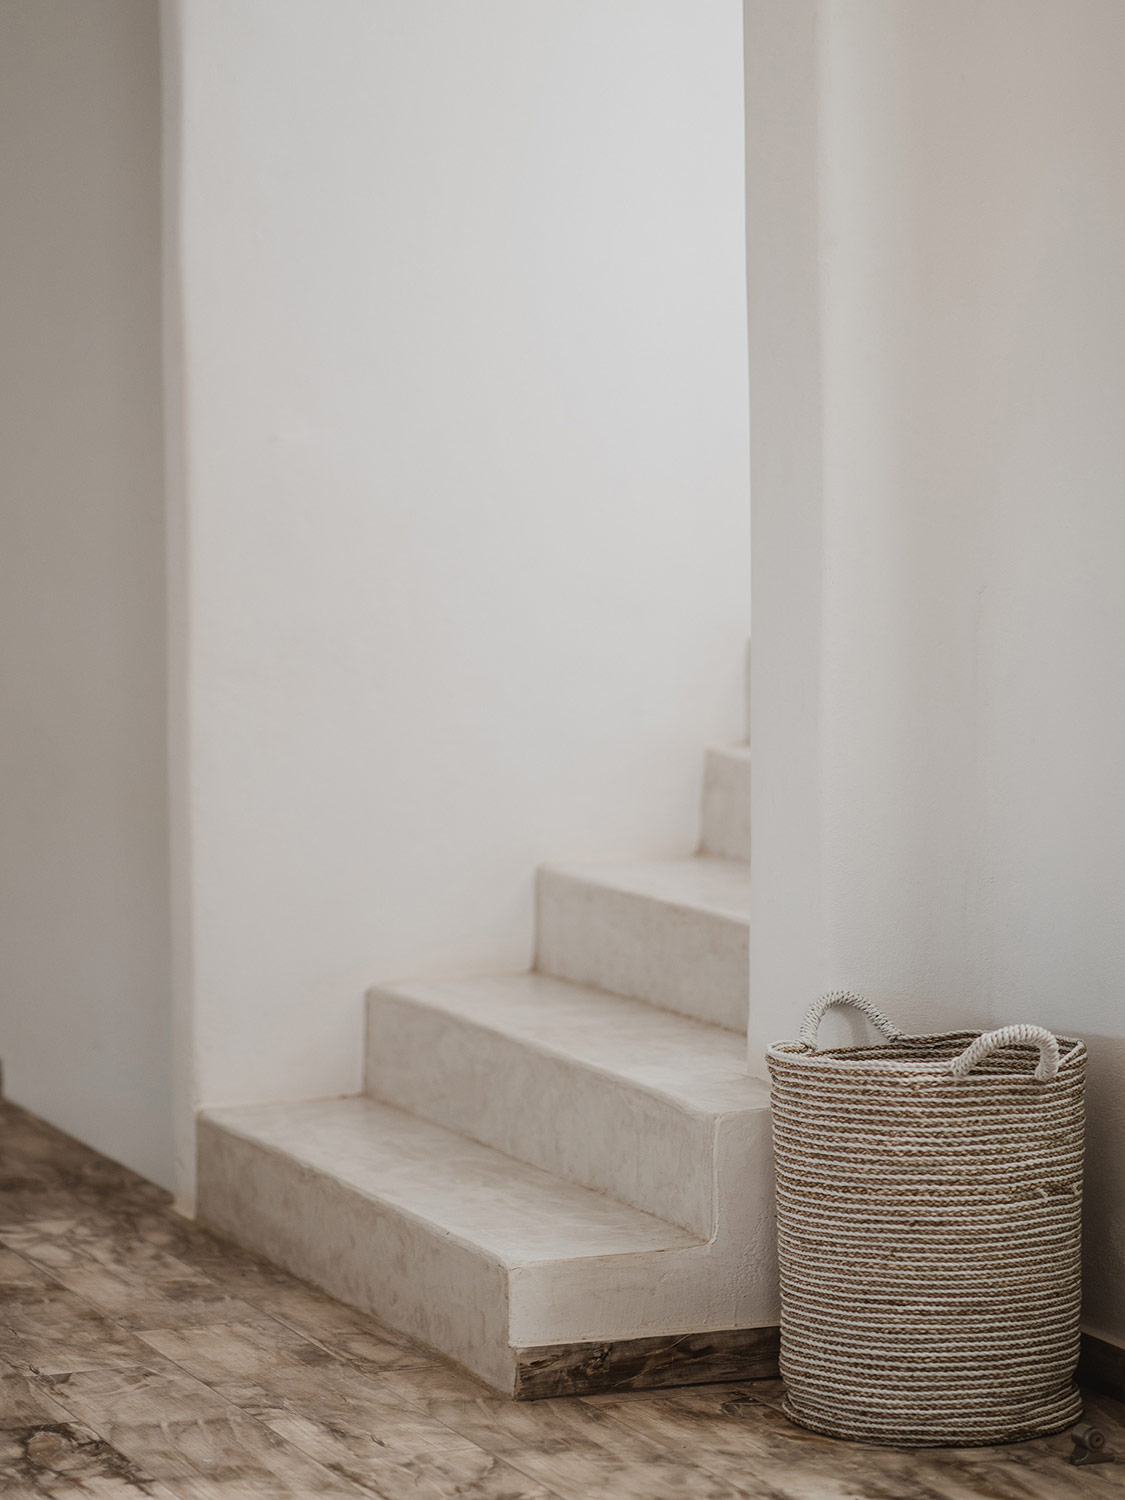 Rustic white staircase with a cord basket